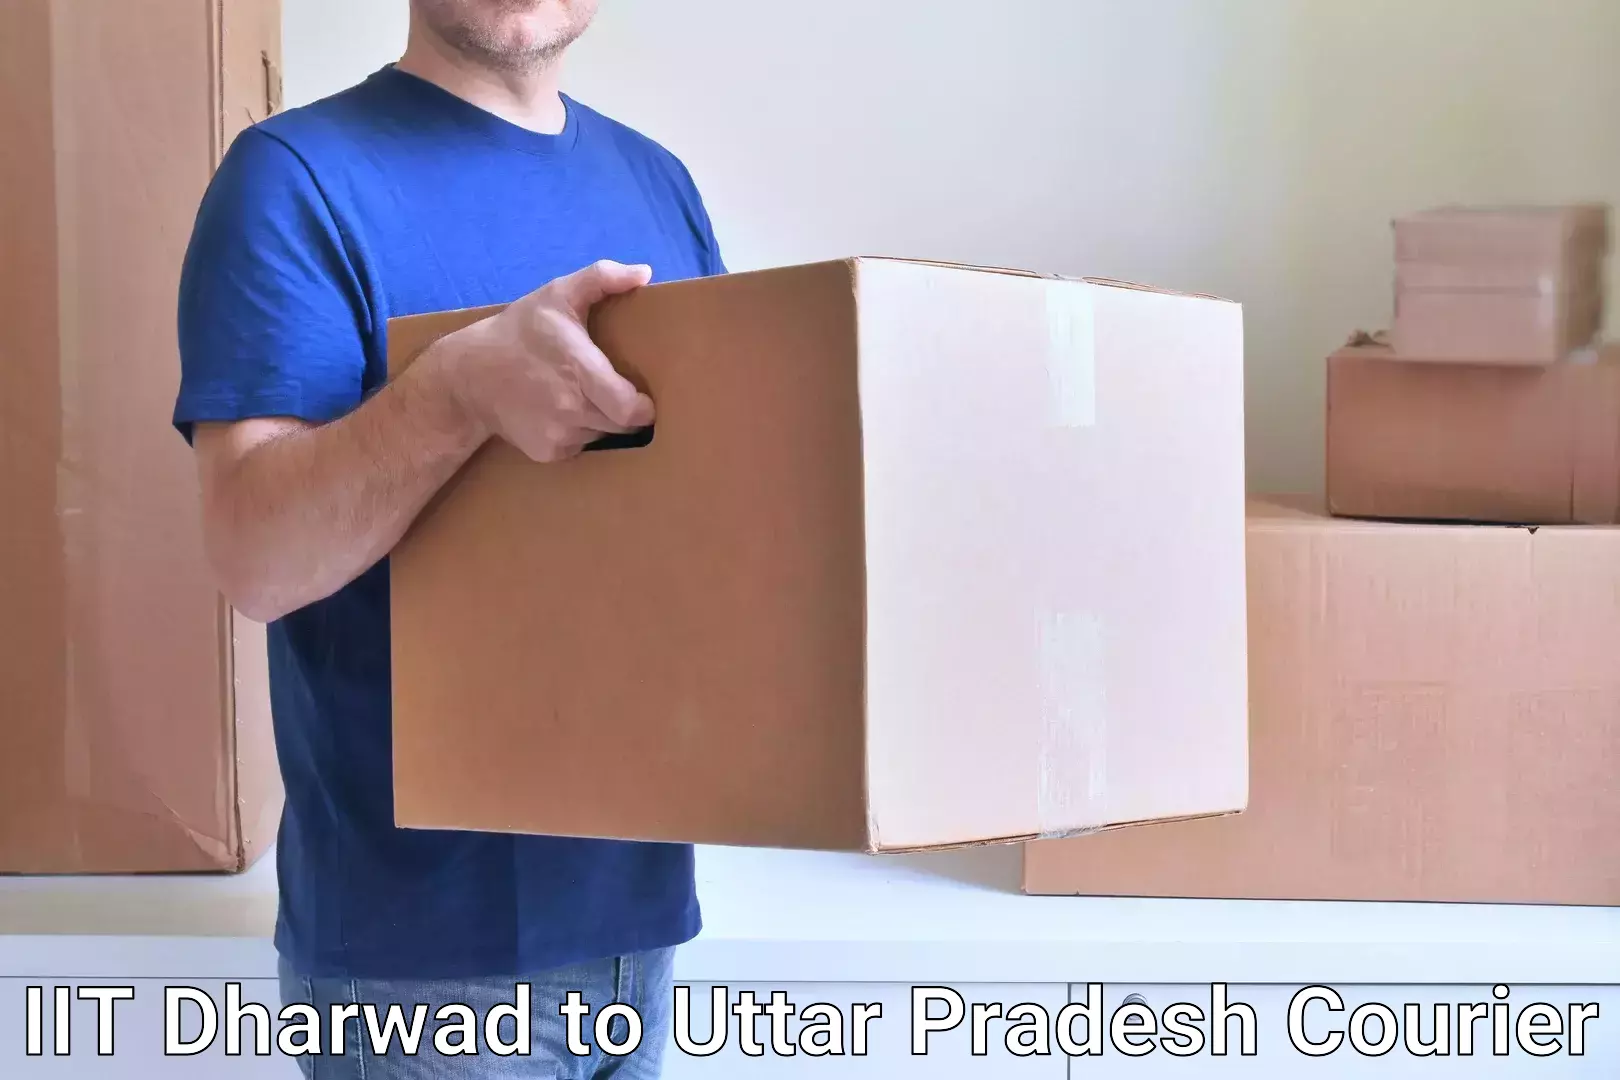 Round-the-clock parcel delivery IIT Dharwad to Aligarh